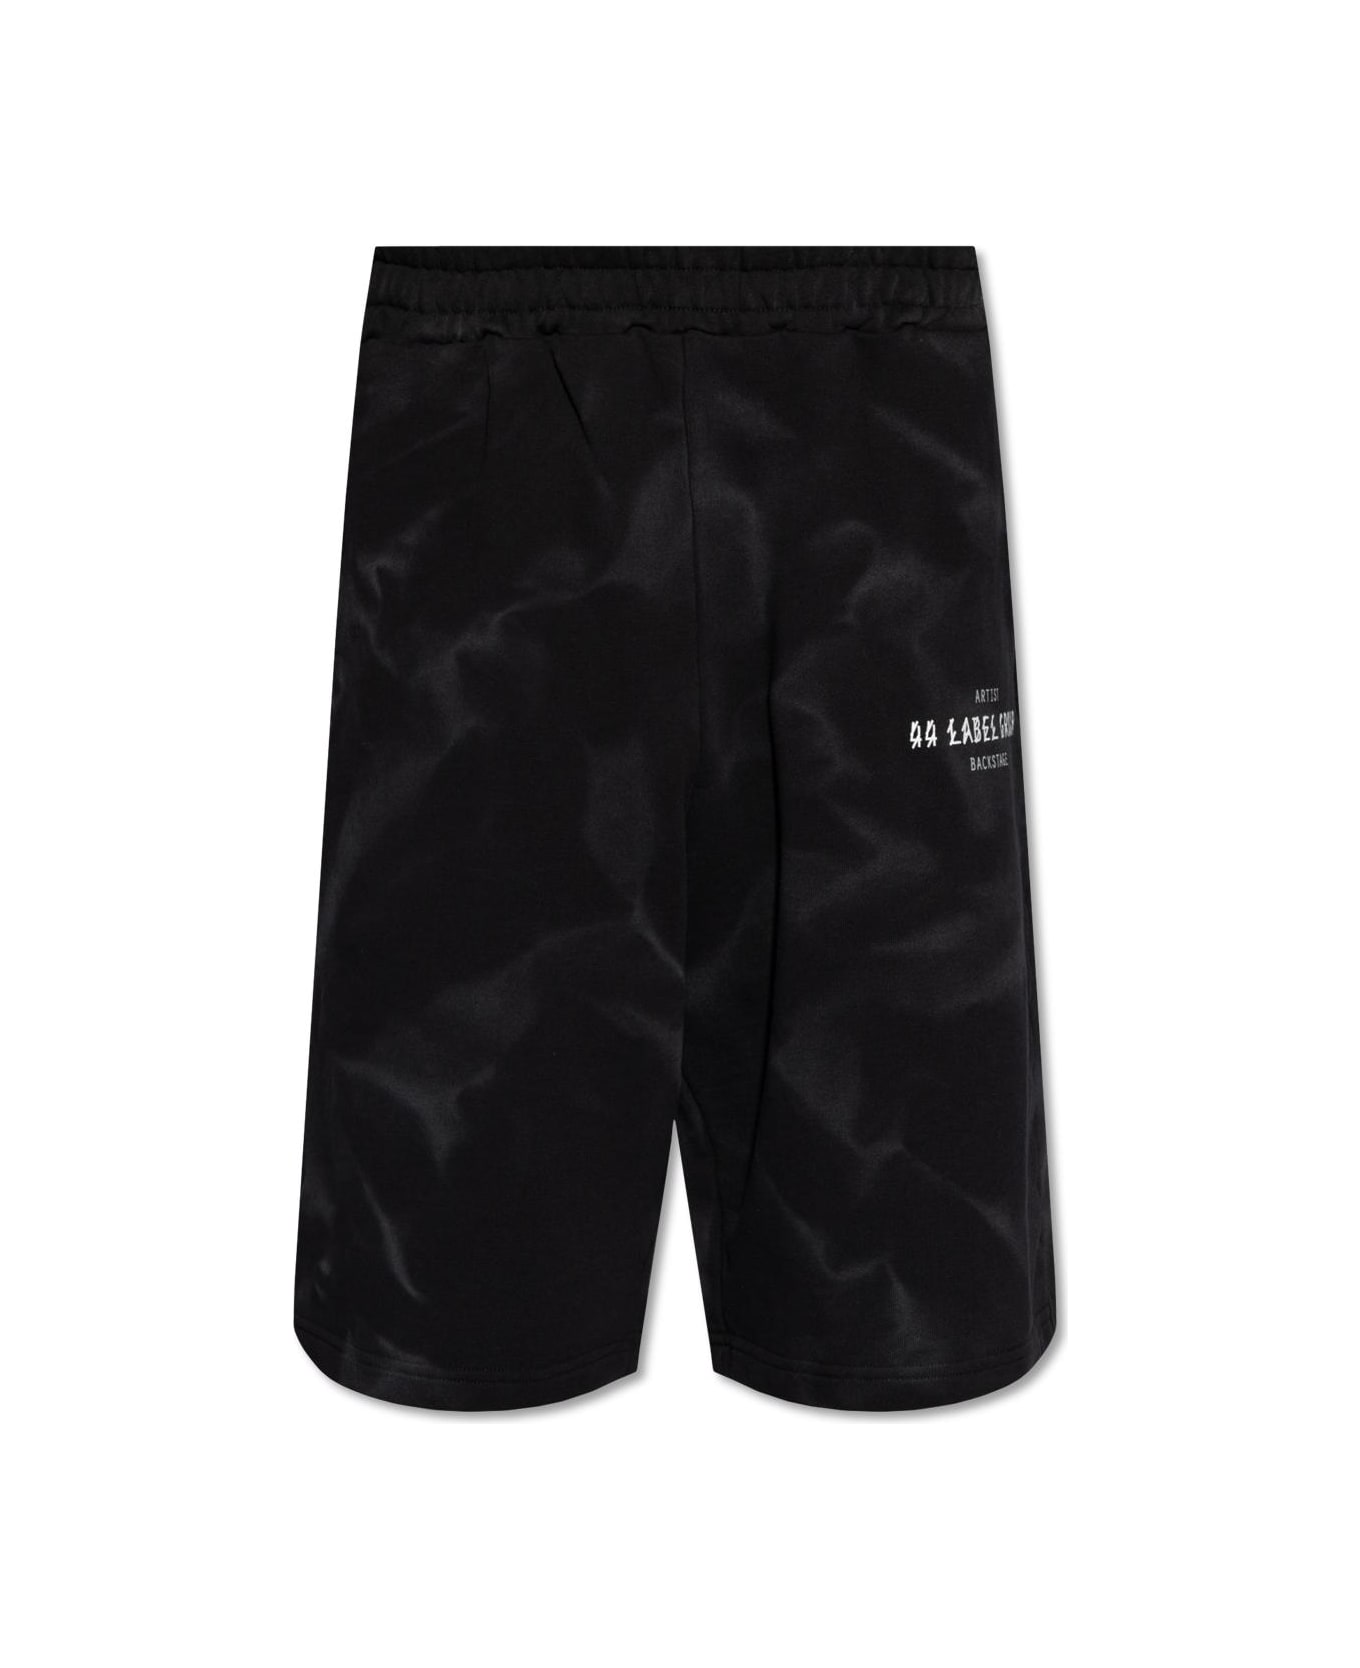 44 Label Group Cotton Shorts With Print - Black ショートパンツ